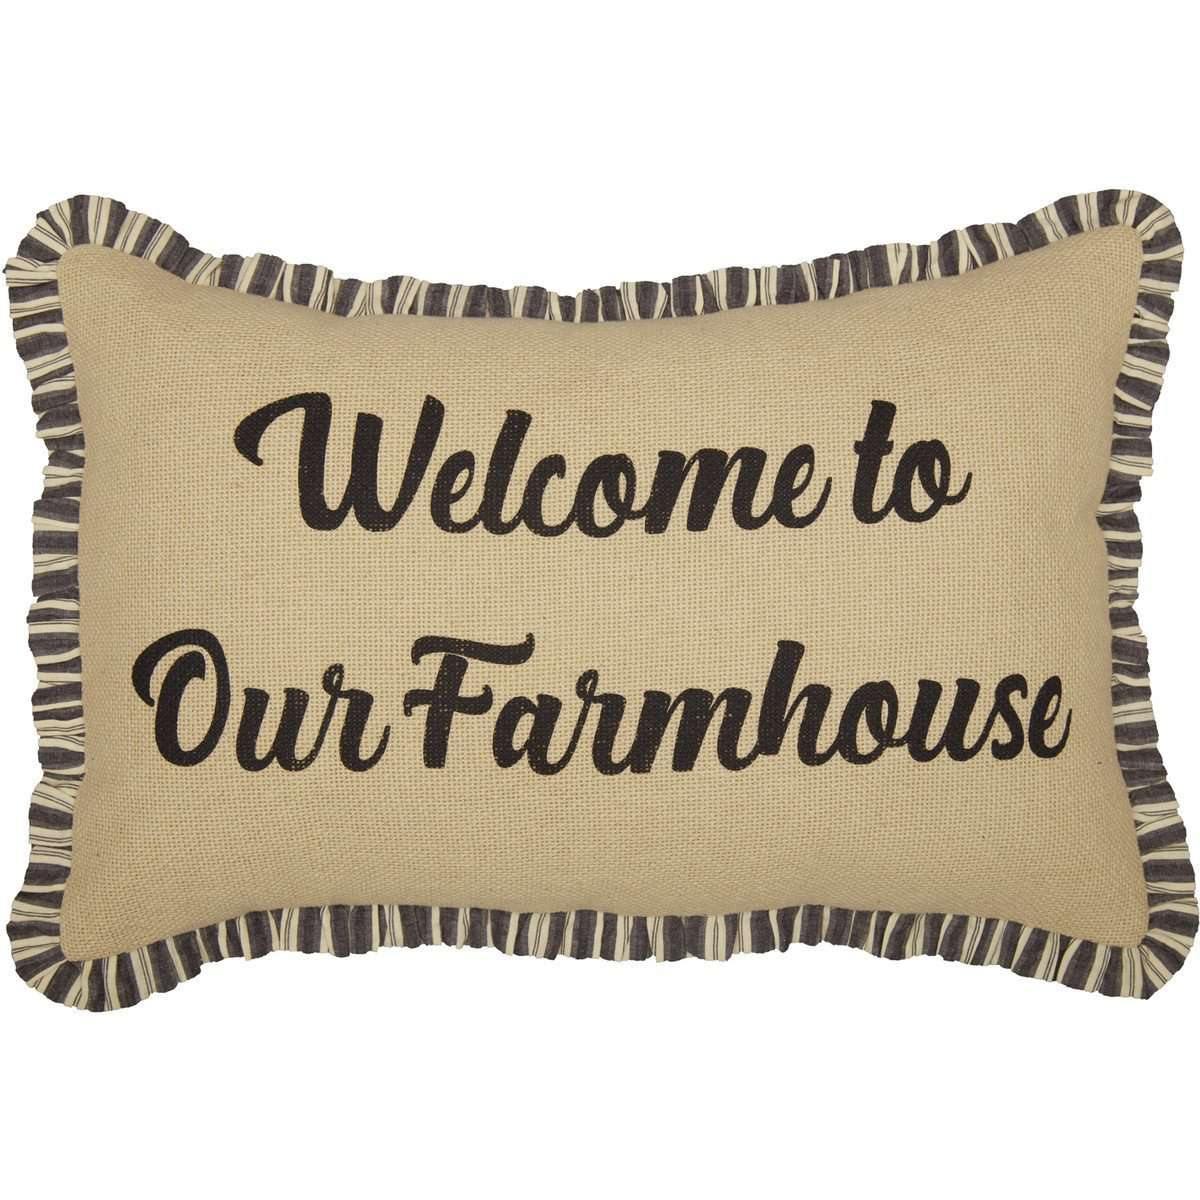 Ashmont Burlap Vintage Welcome to Our Farmhouse Pillow 14x22 VHC Brands front